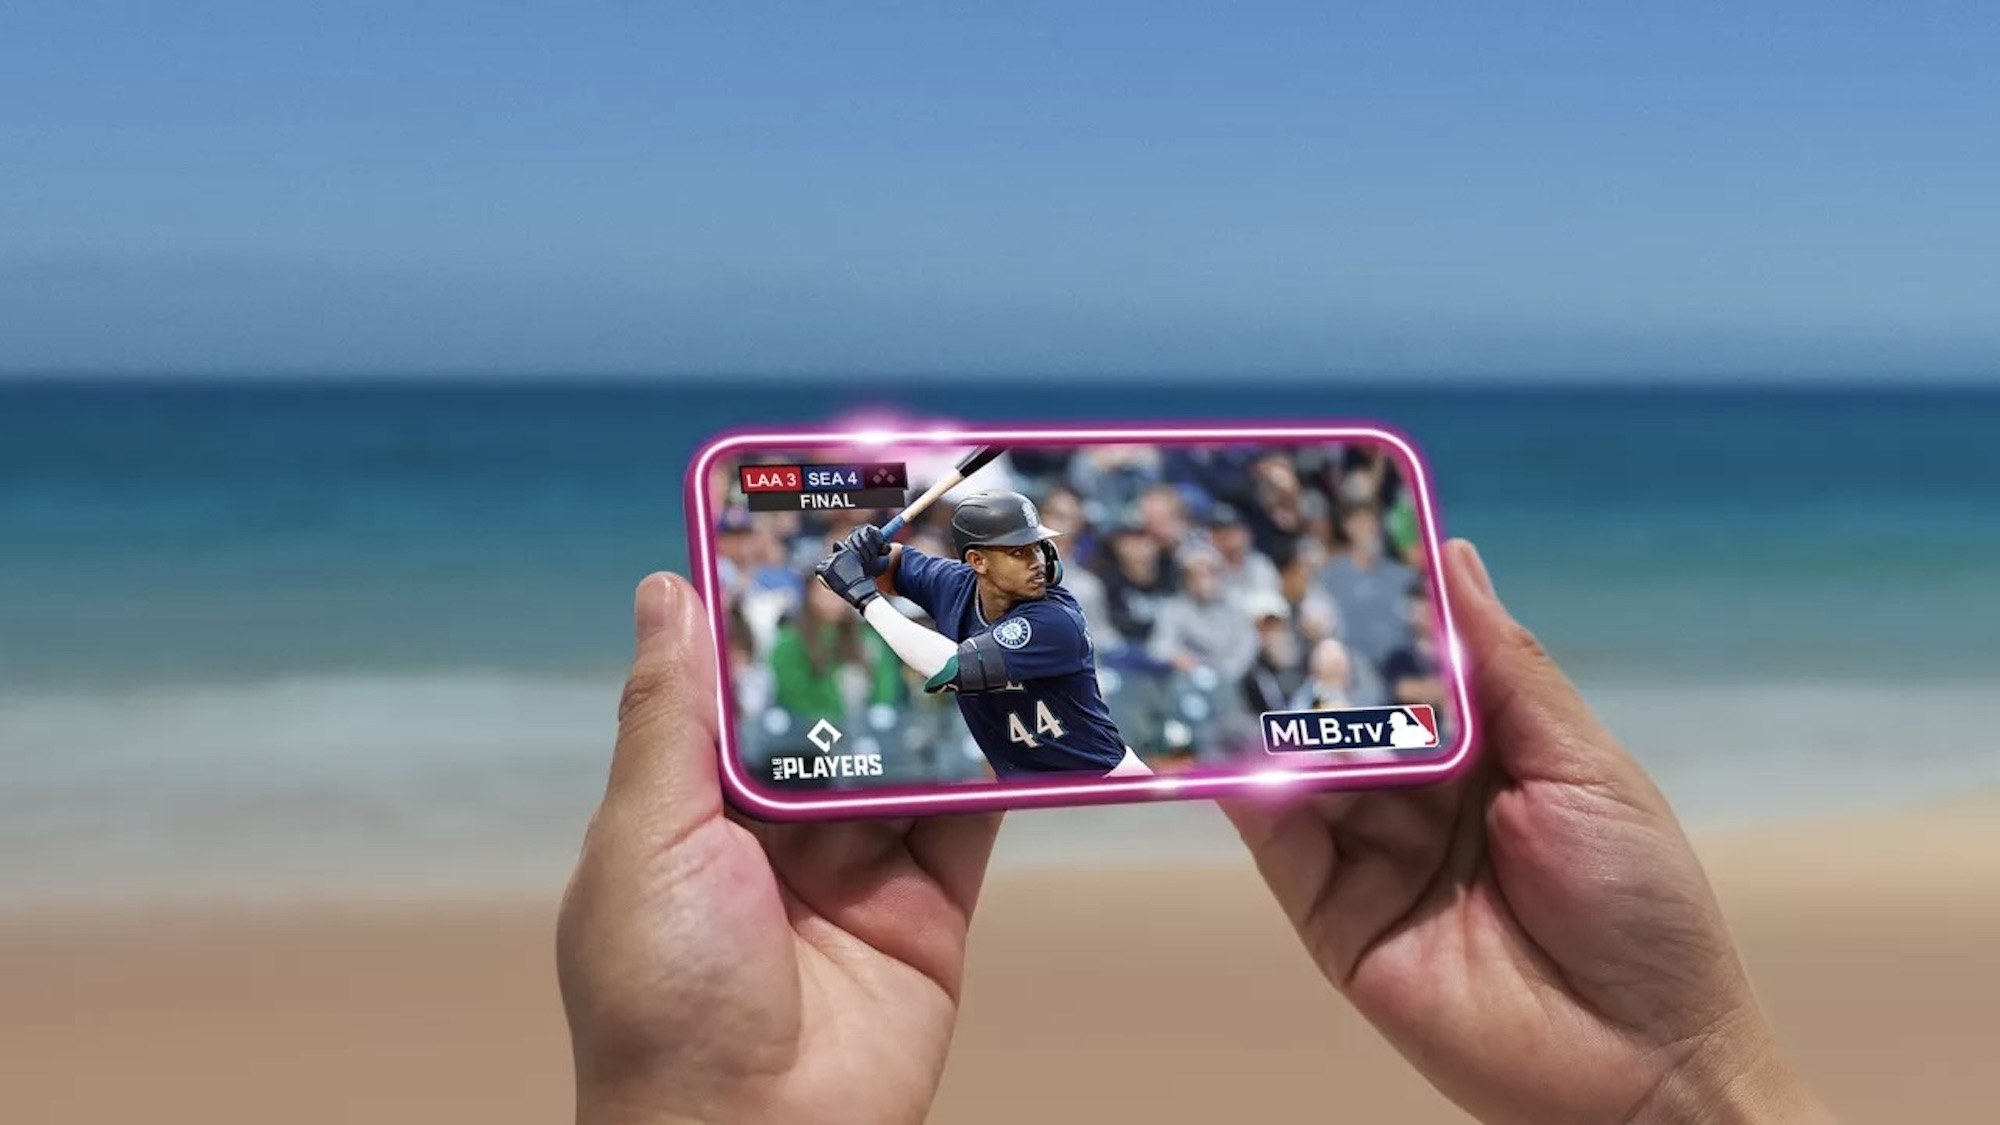 TMobiles free MLBTV offer is now available  TmoNews